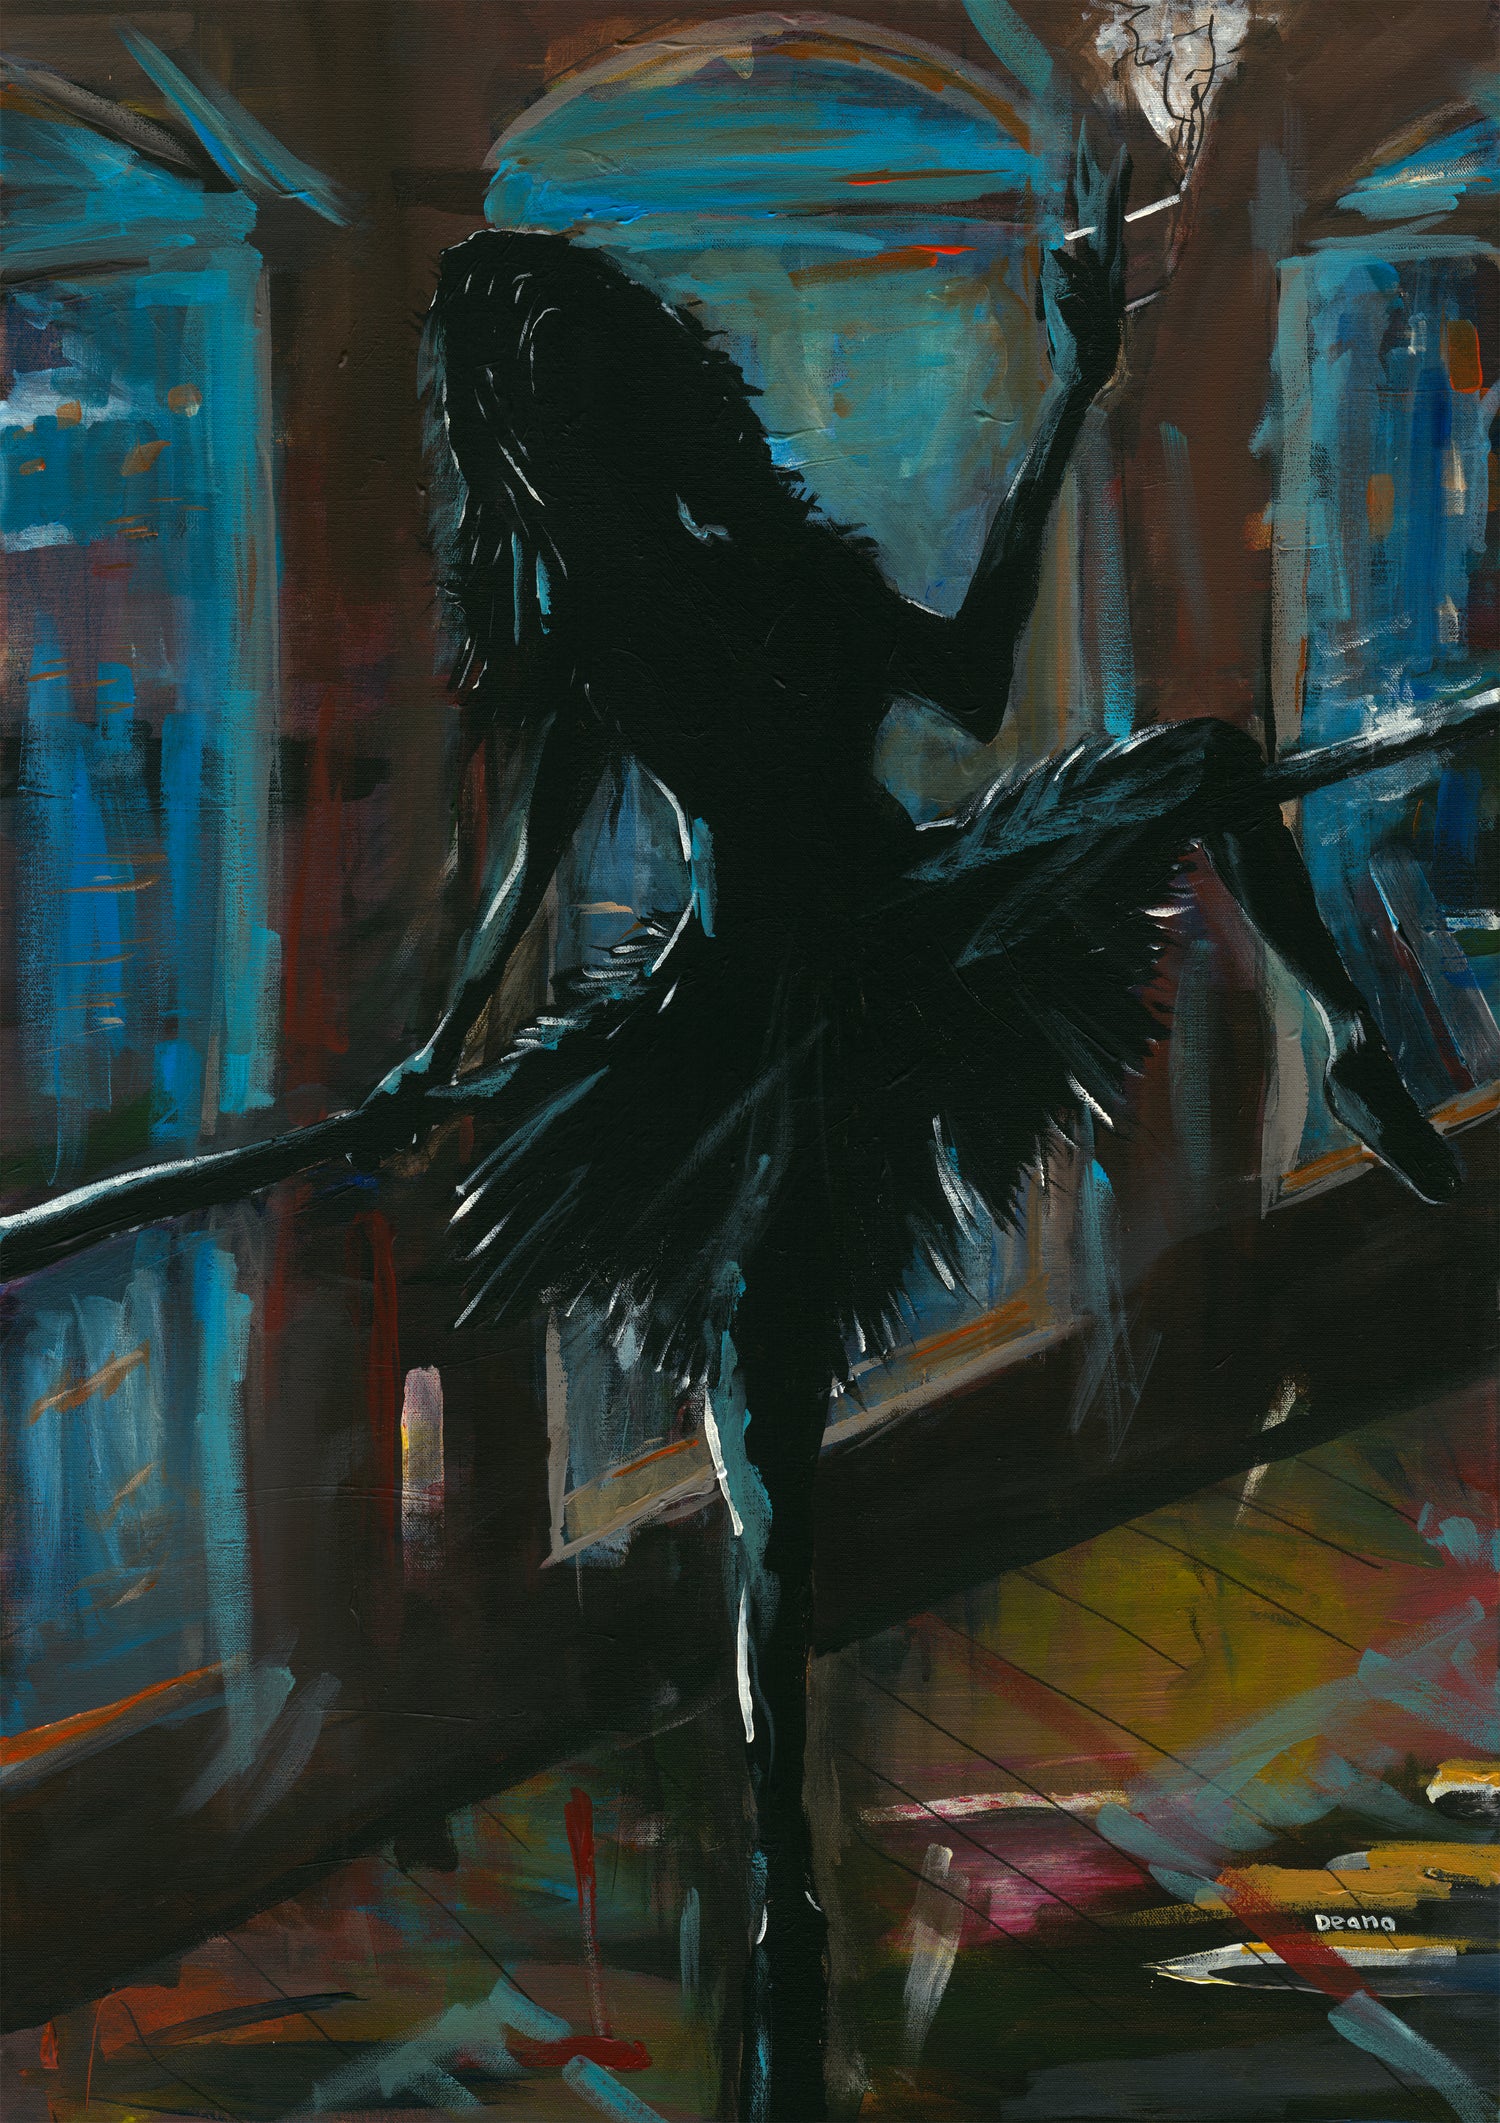 A close up of limited-edition print of a ballerina dressed in a black tutu smoking a cigarette. Her body is obscured by the darkness, giving the impression of a mysterious and elegant figure